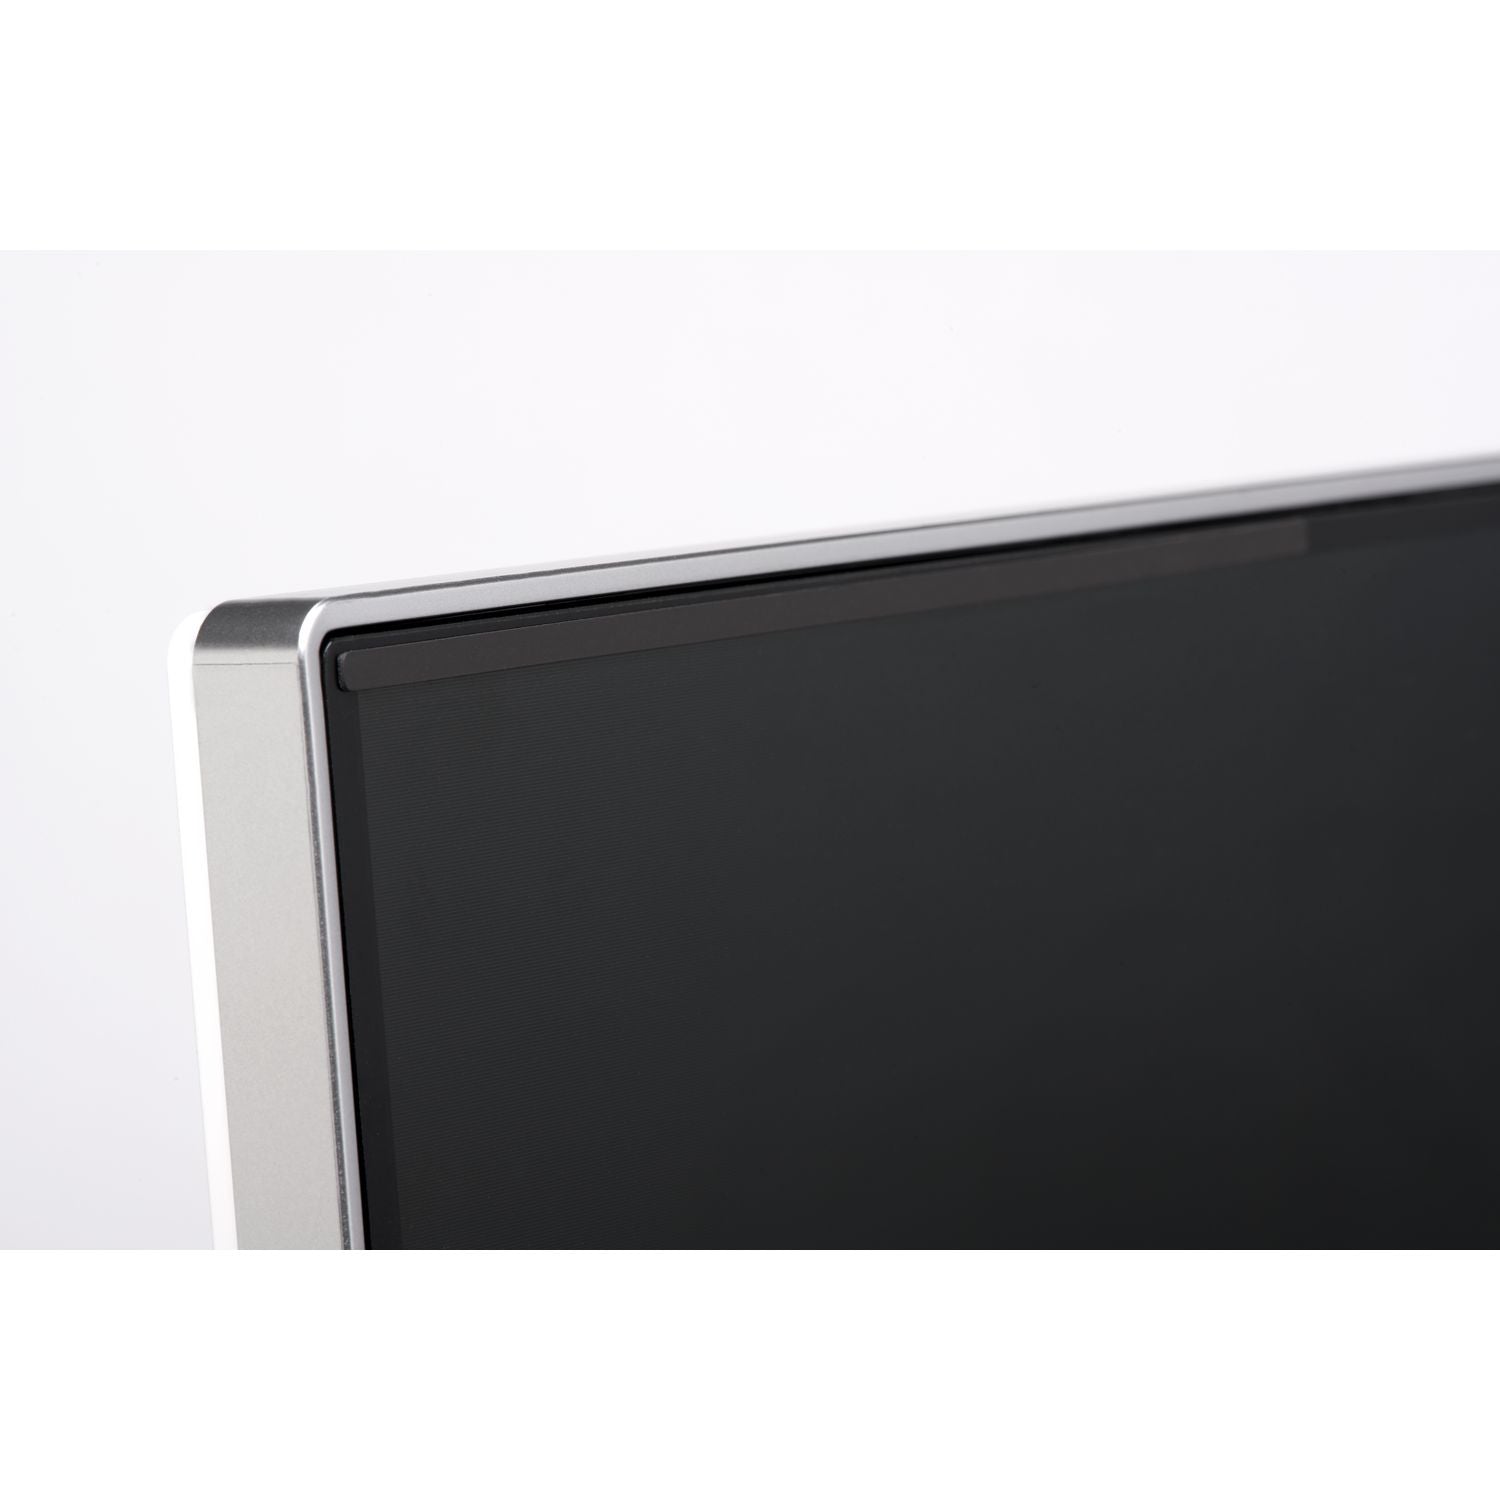 magnetic-monitor-privacy-screen-for-24-widescreen-flat-panel-monitors-1610-aspect-ratio_kmw58358 - 3